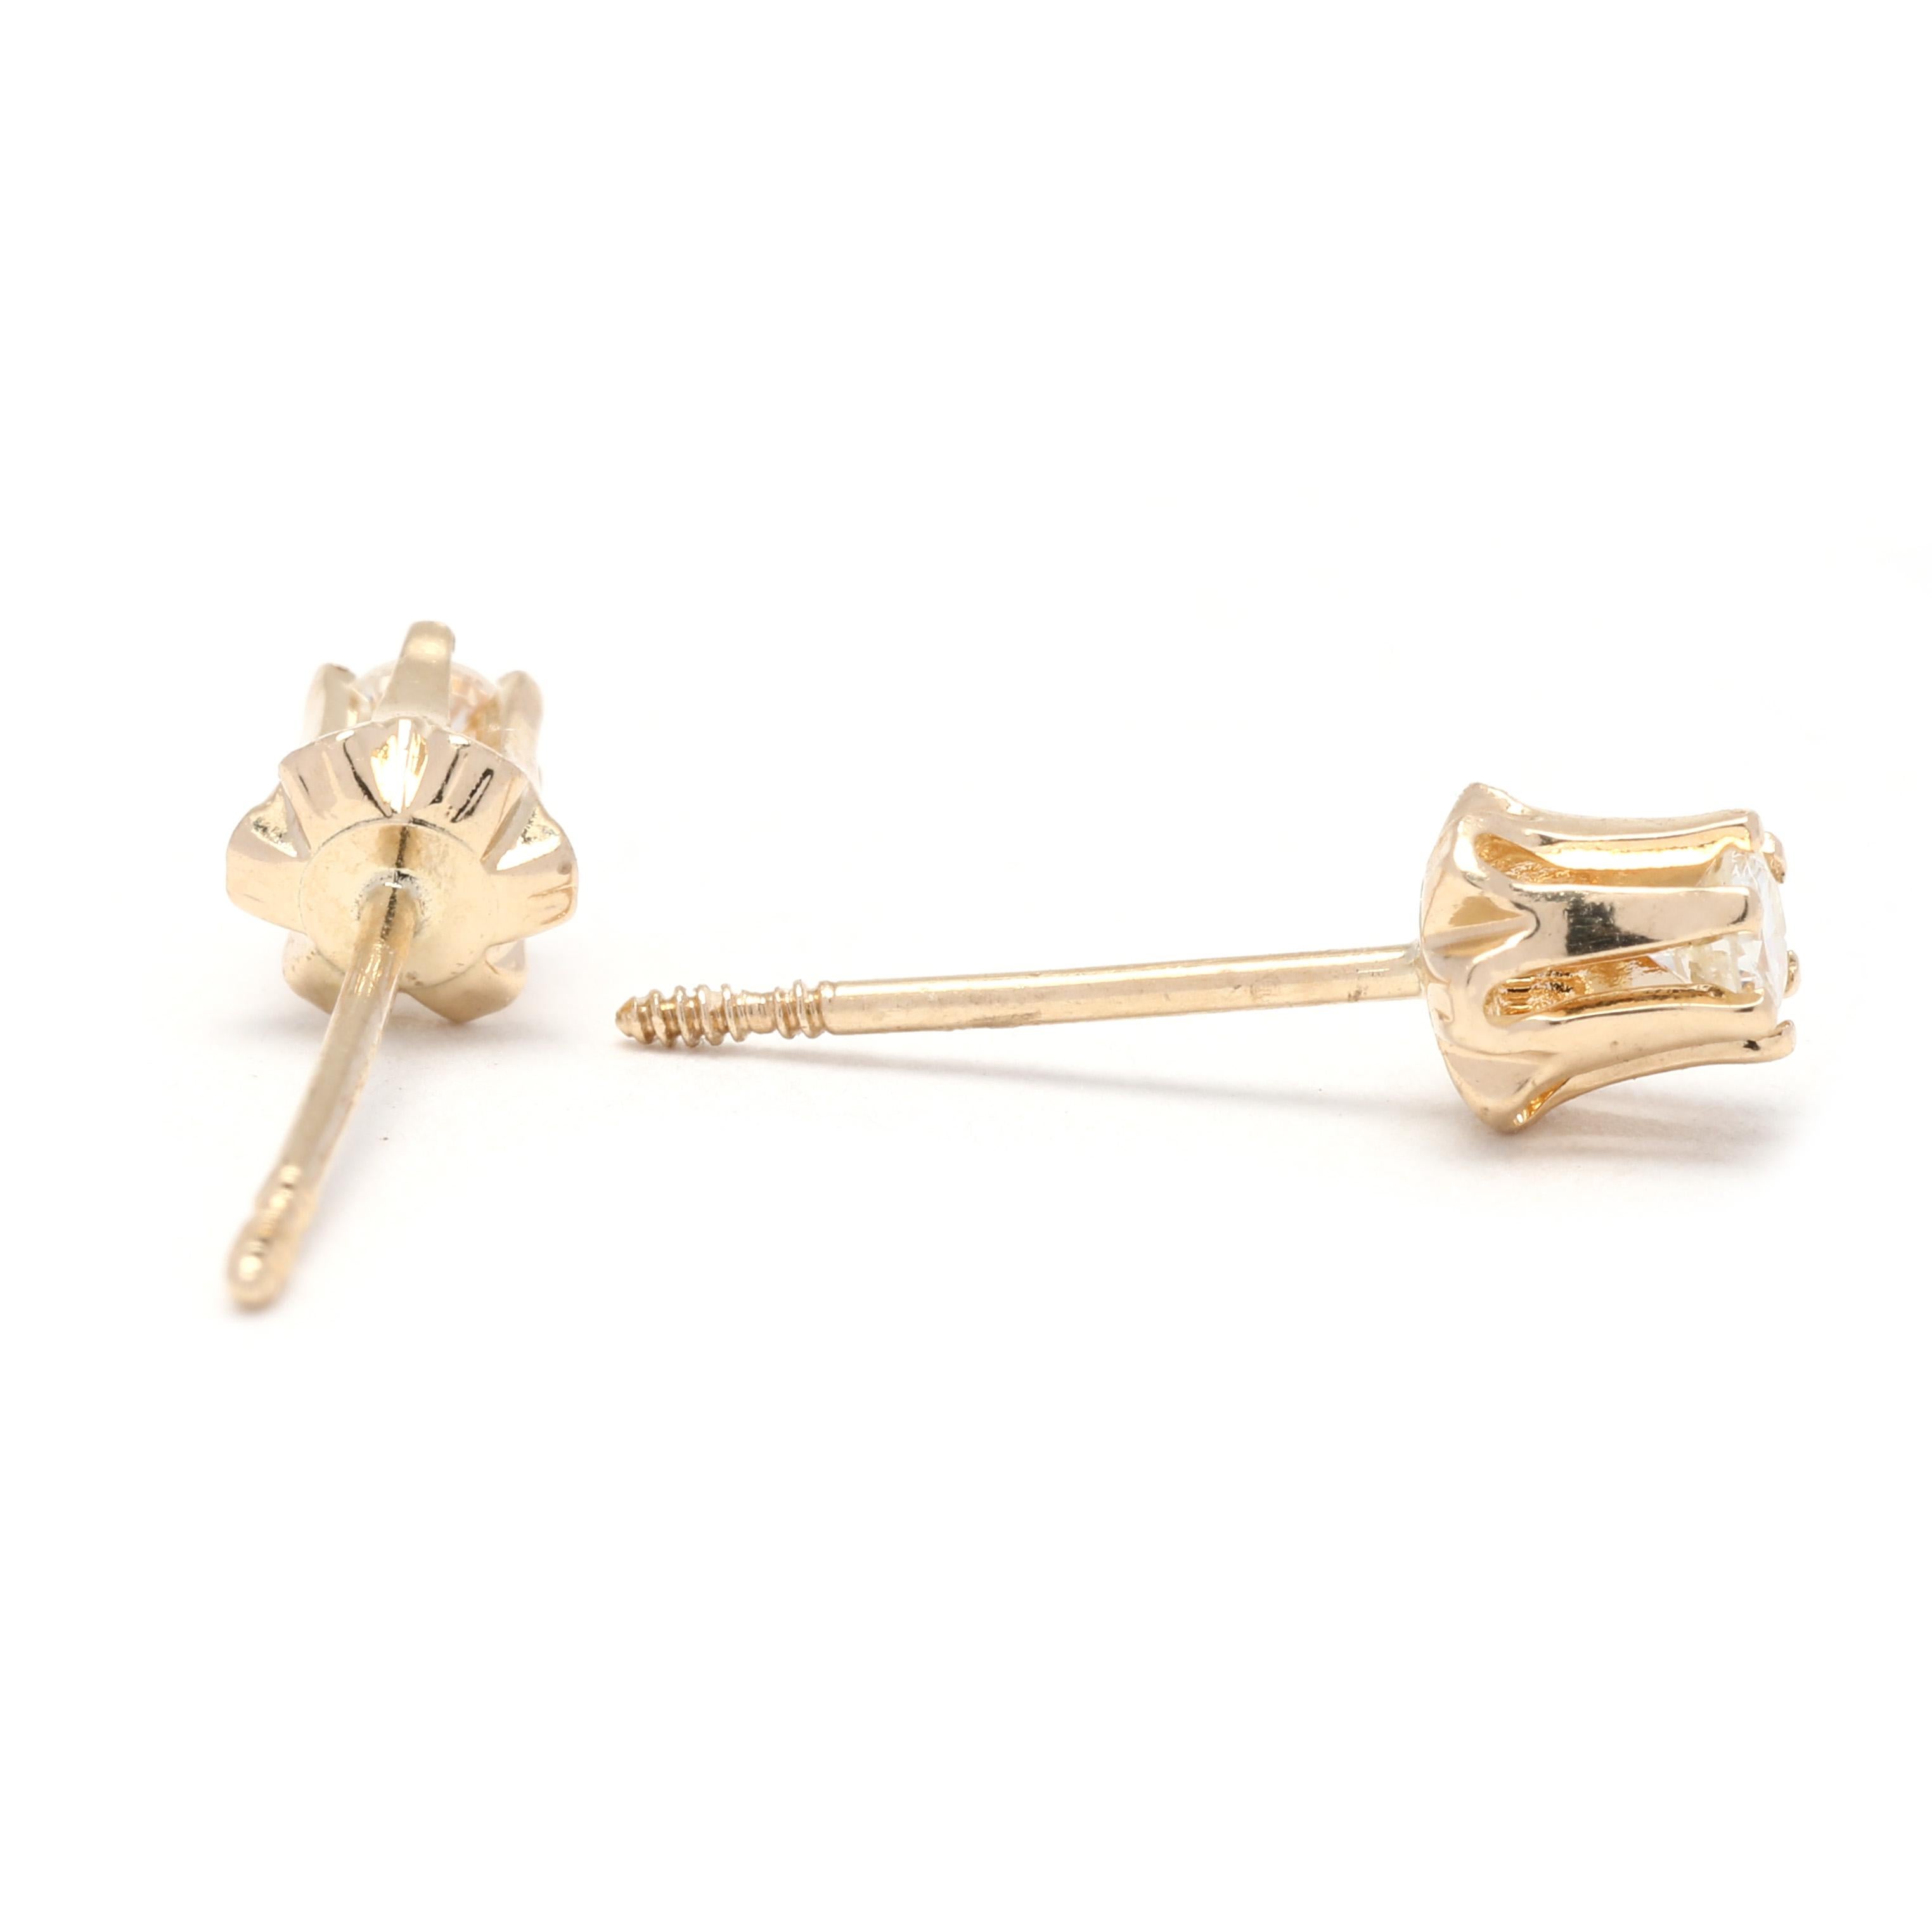 Take your look back to the past with these 14K Yellow Gold Diamond Tulip Stud Earrings. These earrings feature 0.08ctw of ultra-delicate diamonds, set on craft metal. With a length of 4.15 MM, these vintage studs will perfectly complete your